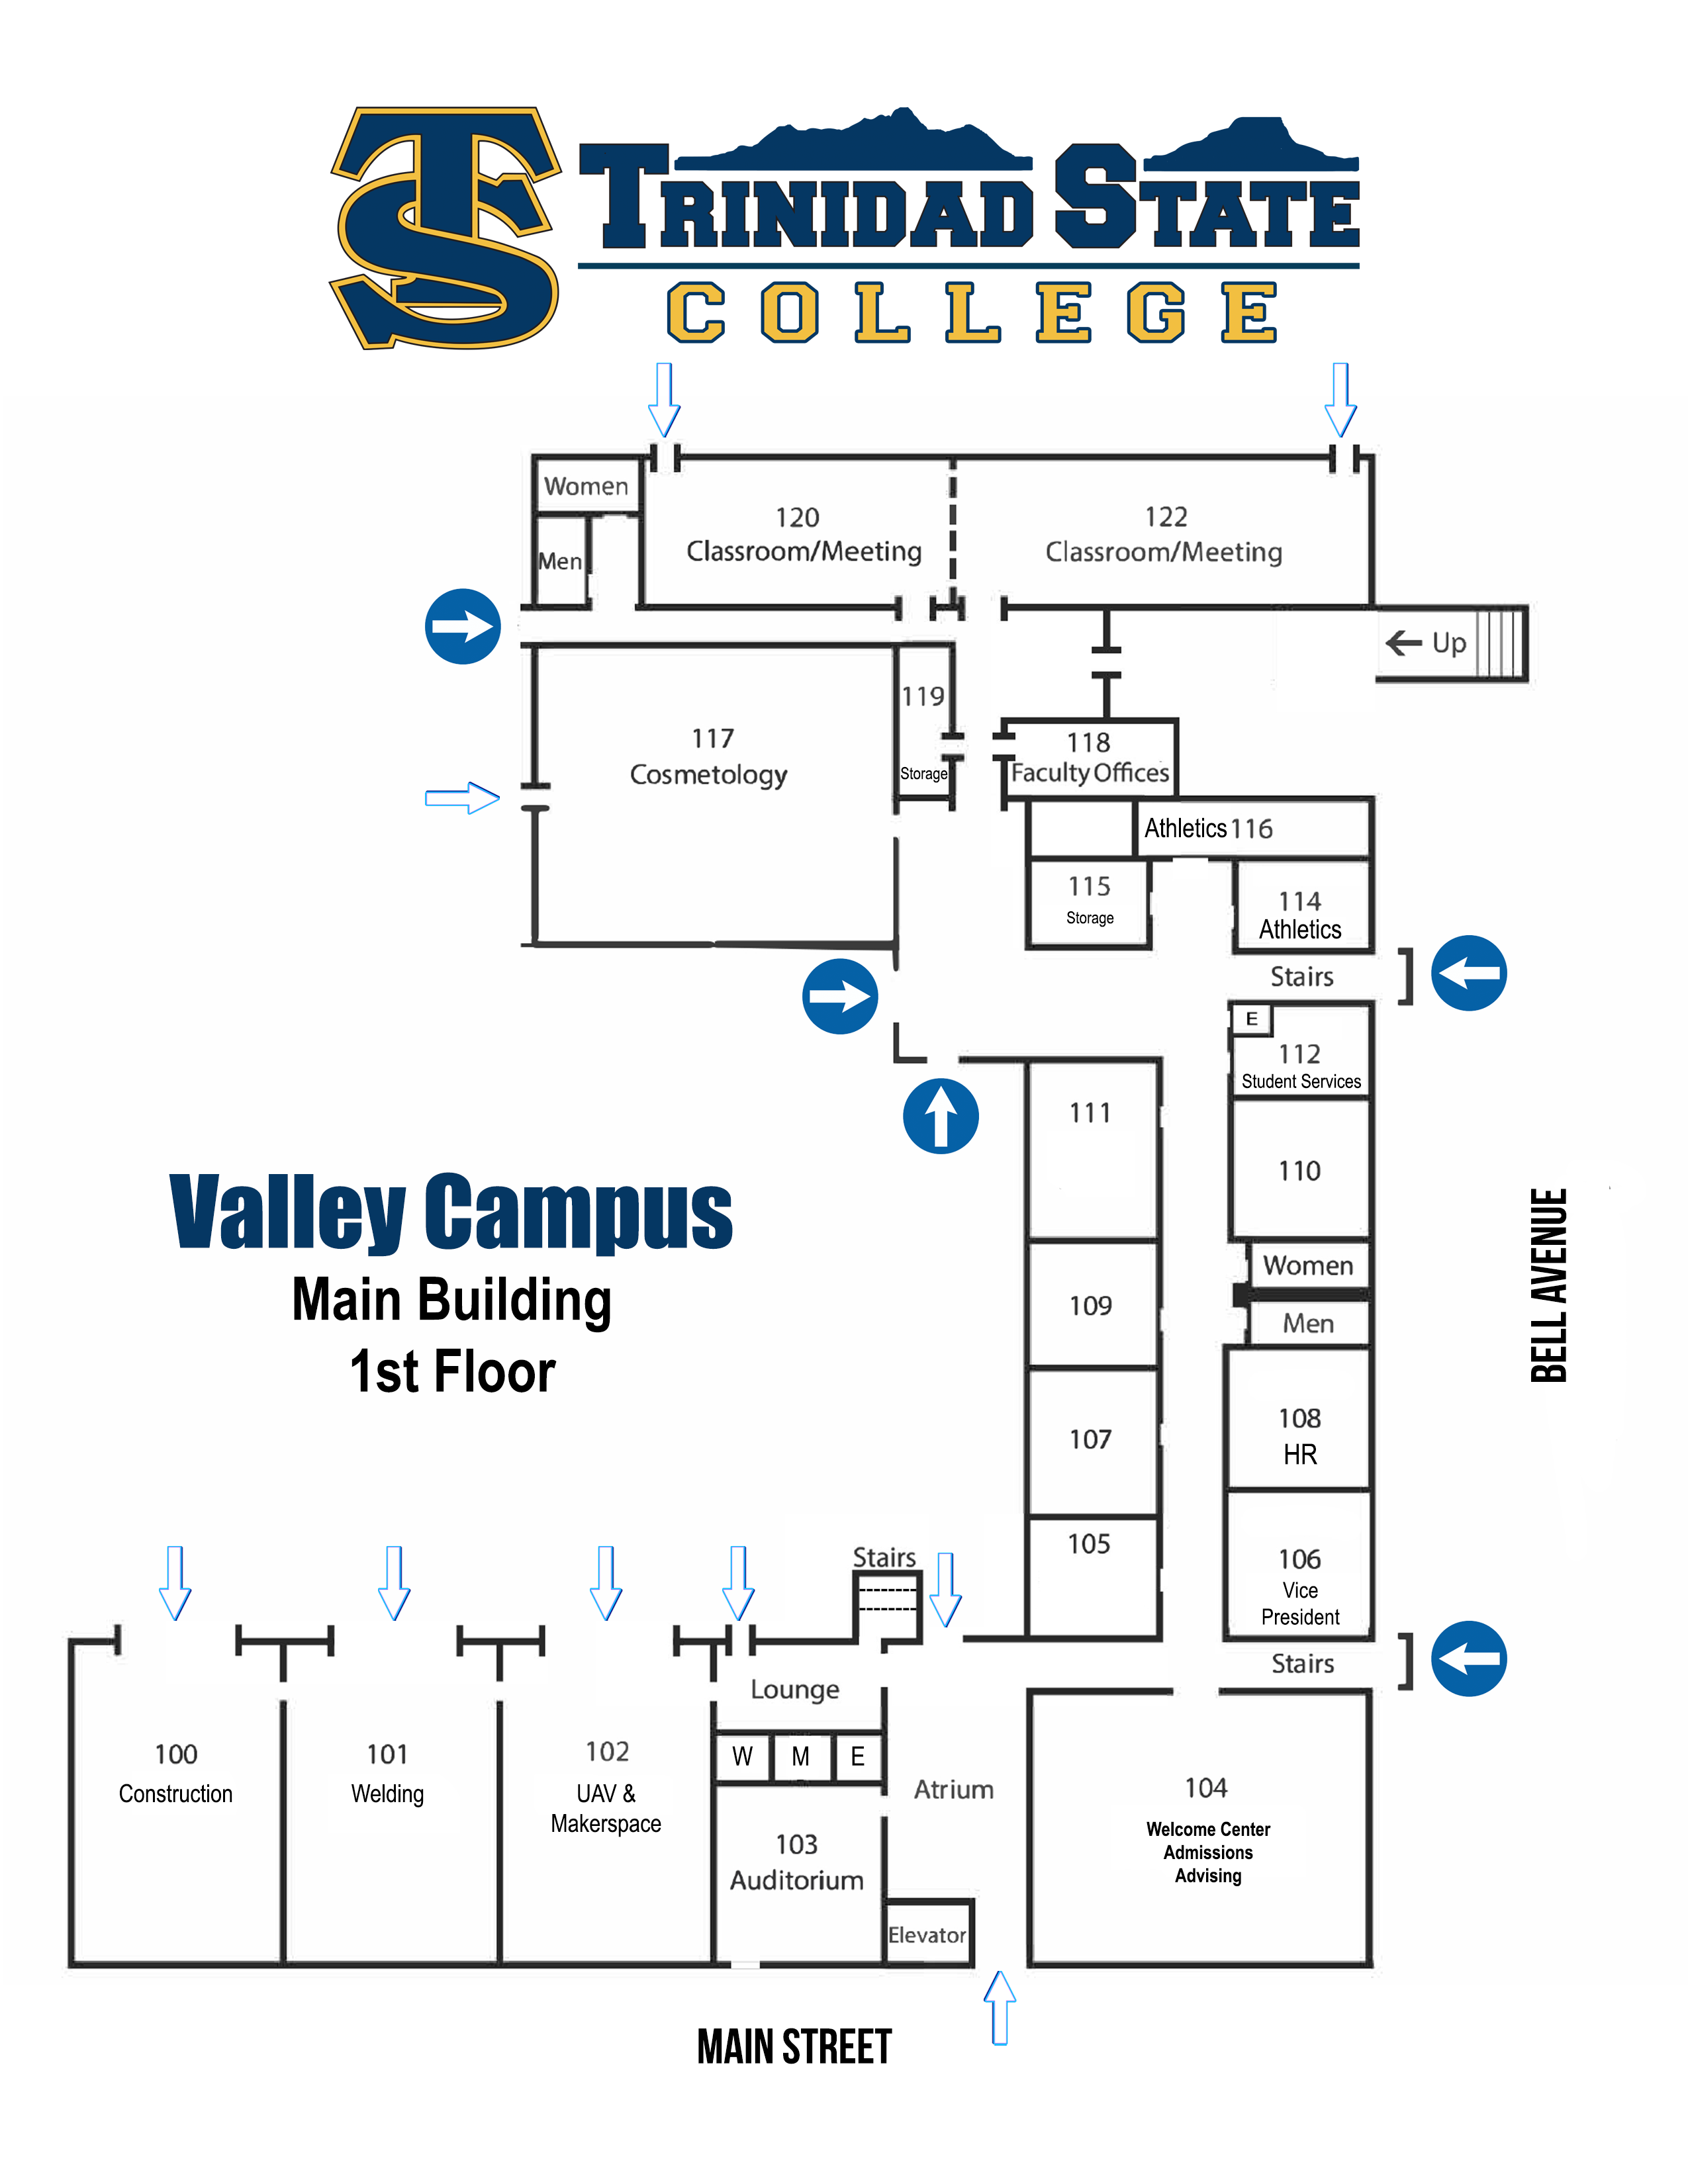 Valley Campus Main Building 1st floor map image and link